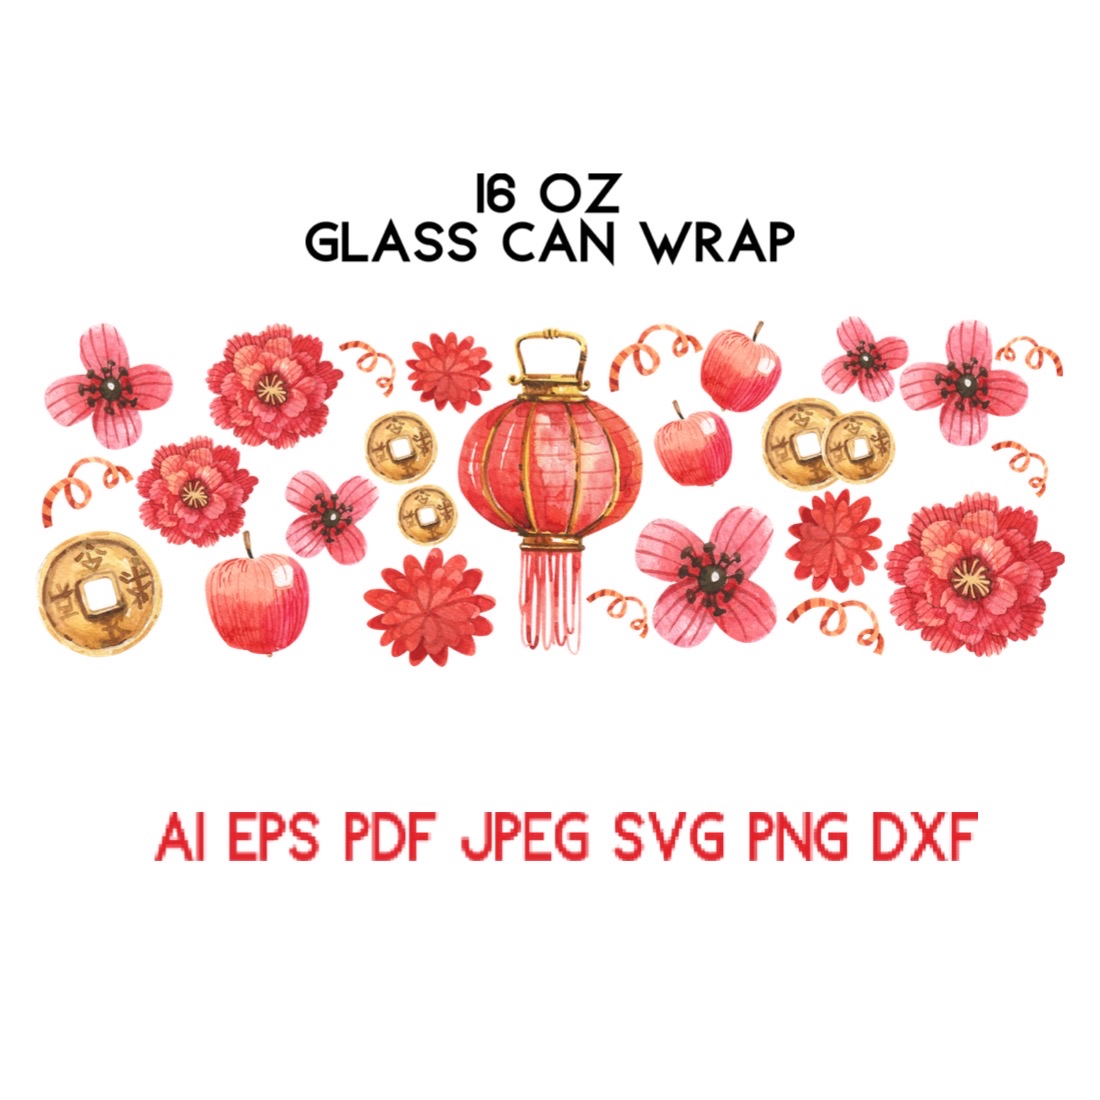 16 Oz Glass Can Wrap Asian Chinese New Year SVG Holiday Pattern Tumbler Libby Glass Watercolor Illustration cover image.